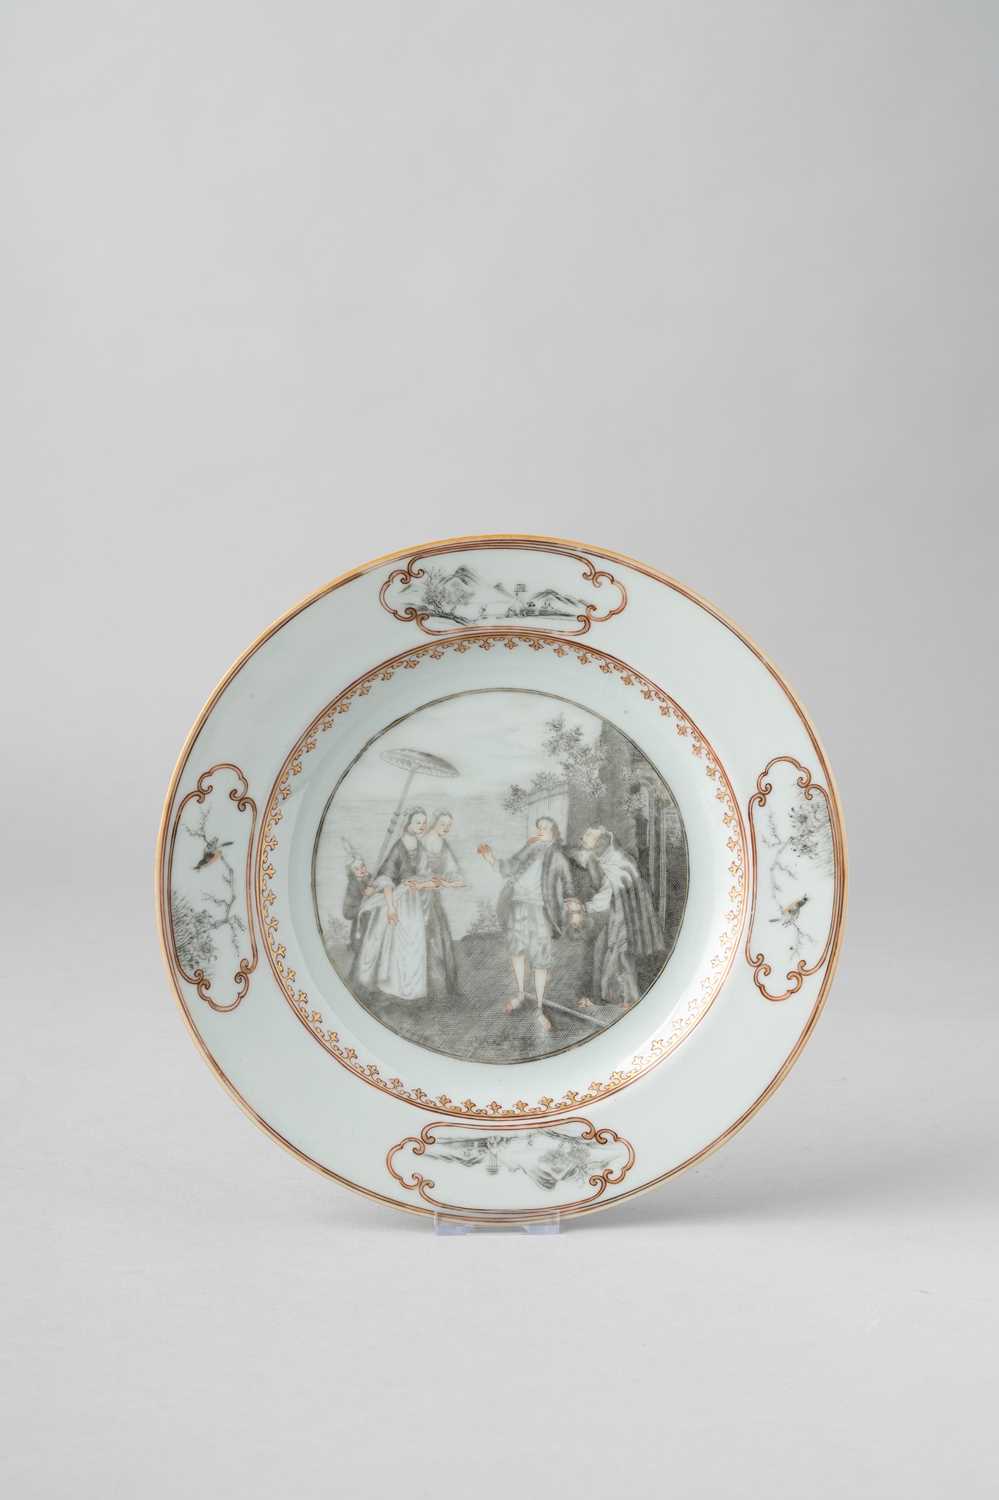 NO RESERVE A CHINESE EN GRISAILLE 'LES OIES DE FRERE PHILIPPE' PLATE C.1745 Decorated with a scene